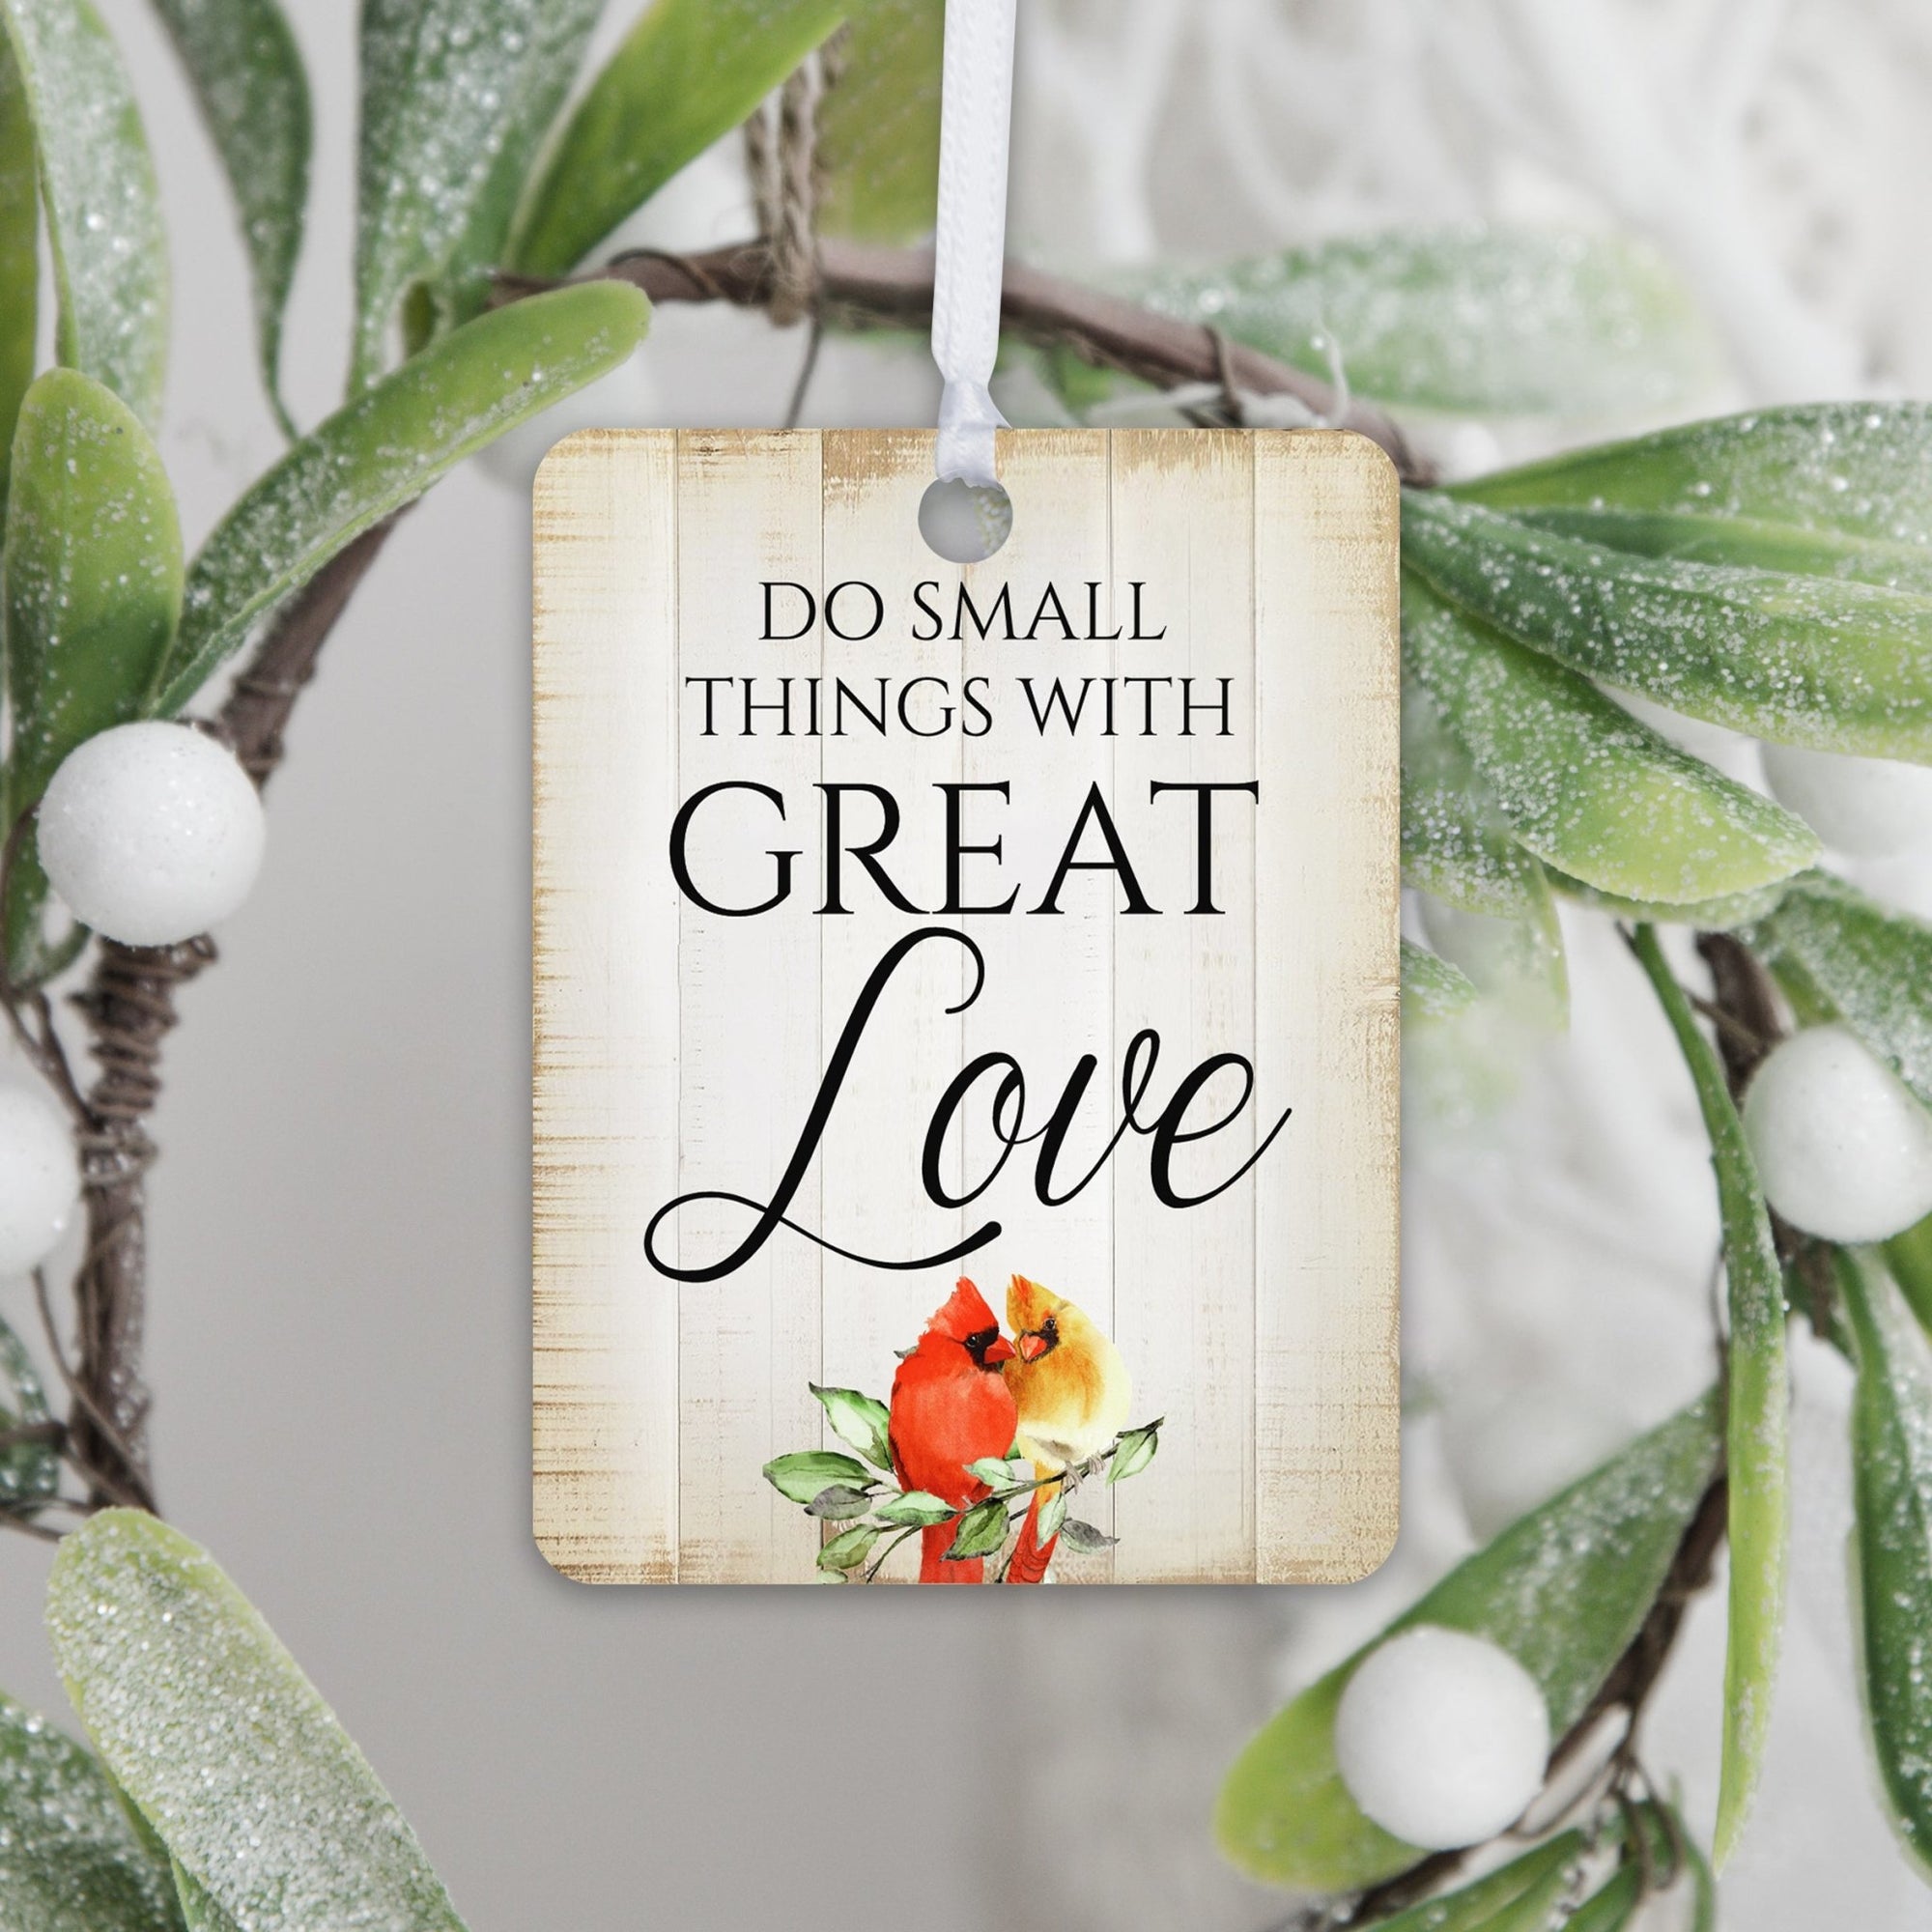 Elegant Vertical Cardinal Wooden Ornament With Everyday Verses Gift Ideas - Do Small Things